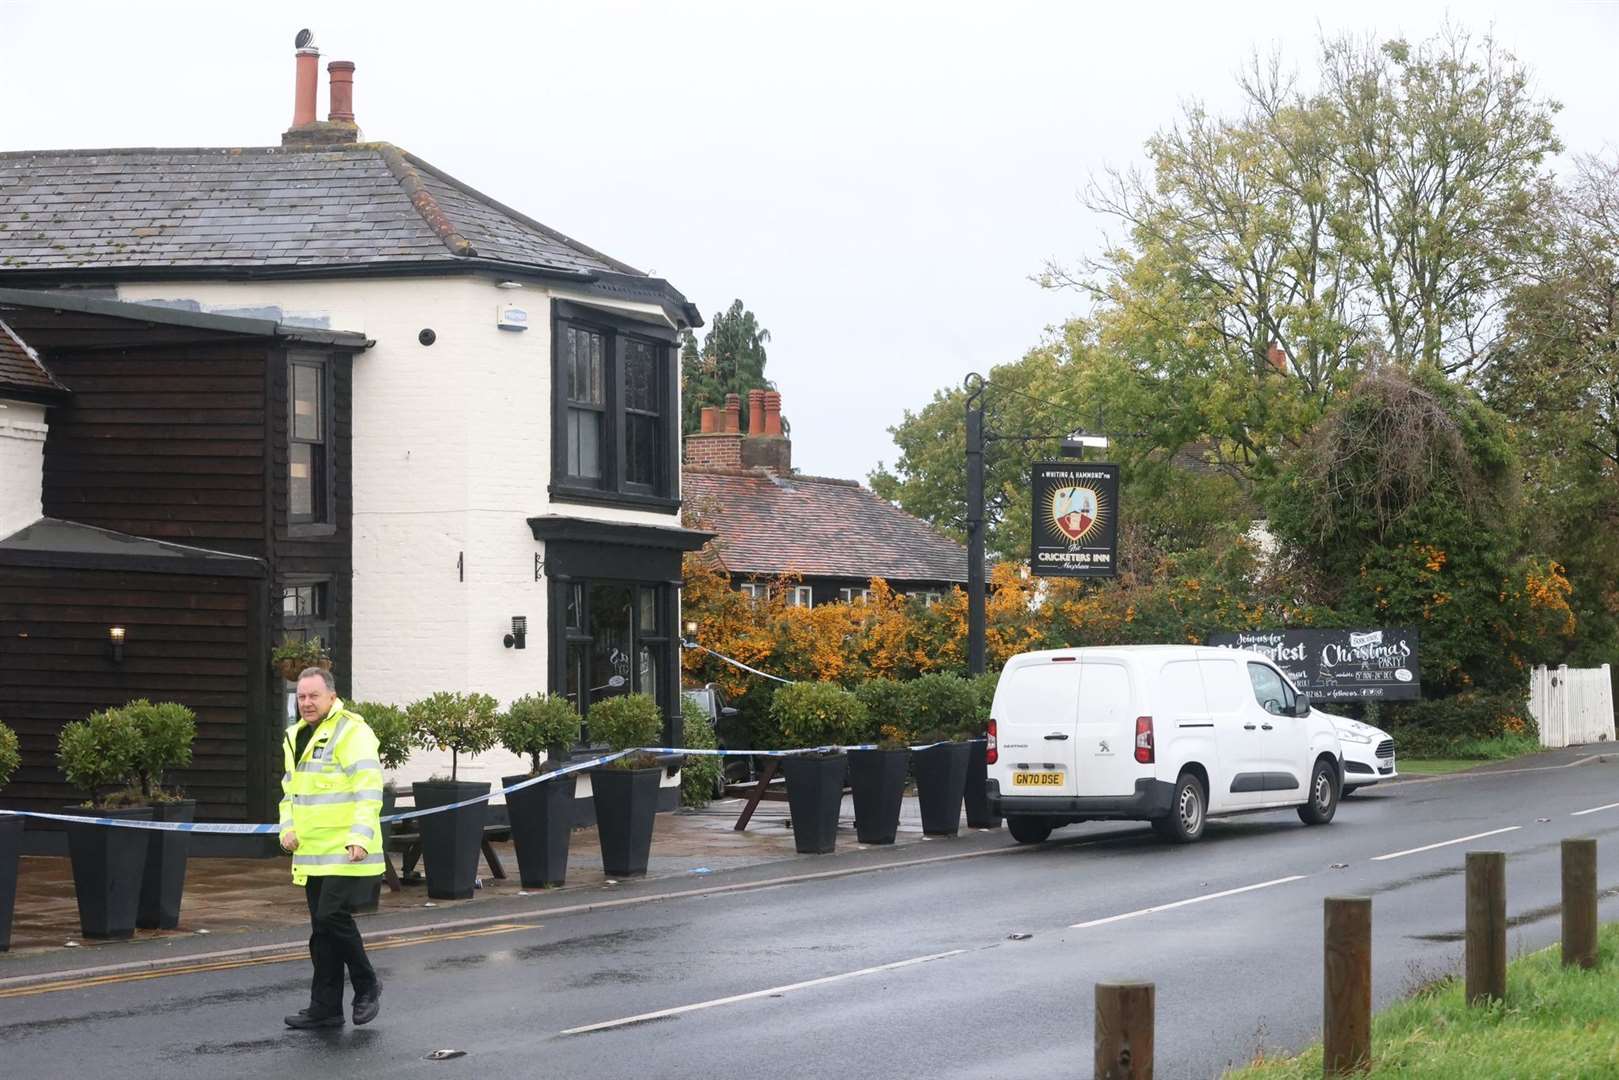 The Cricketers pub in Meopham where a fatal stabbing took place last night. Pic: UKNIP